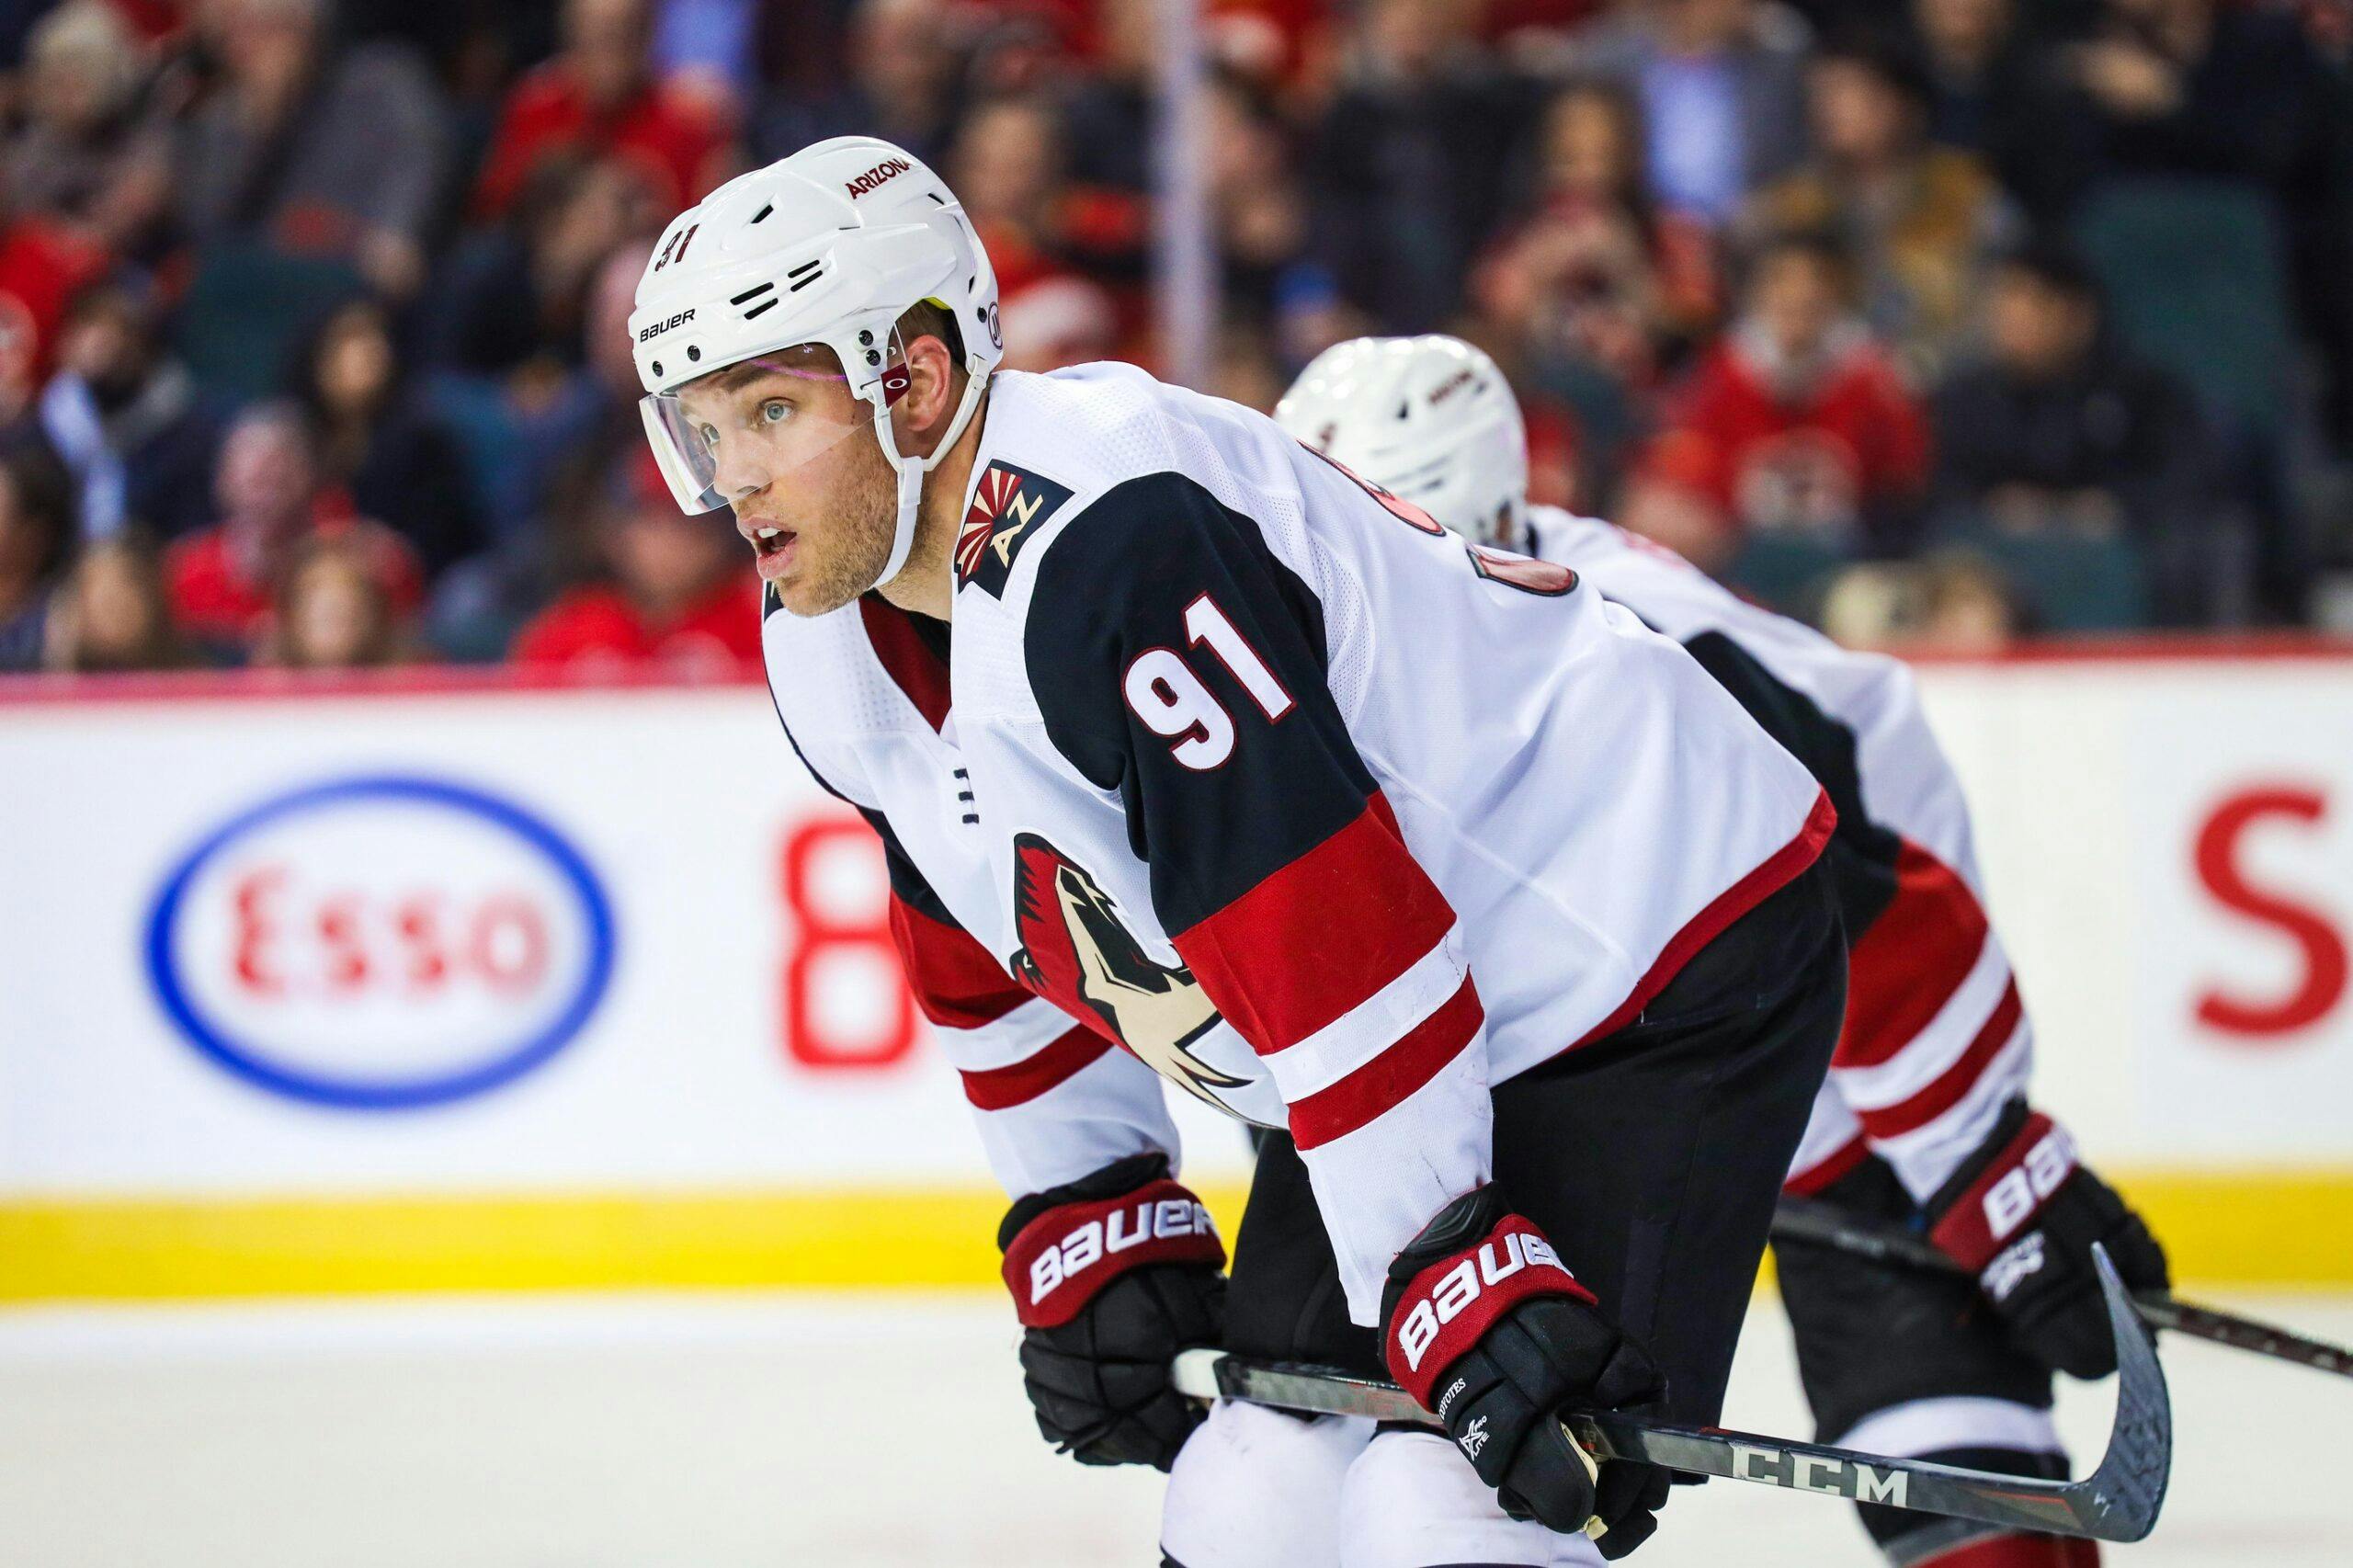 Game Day: Arizona Coyotes at New Jersey Devils